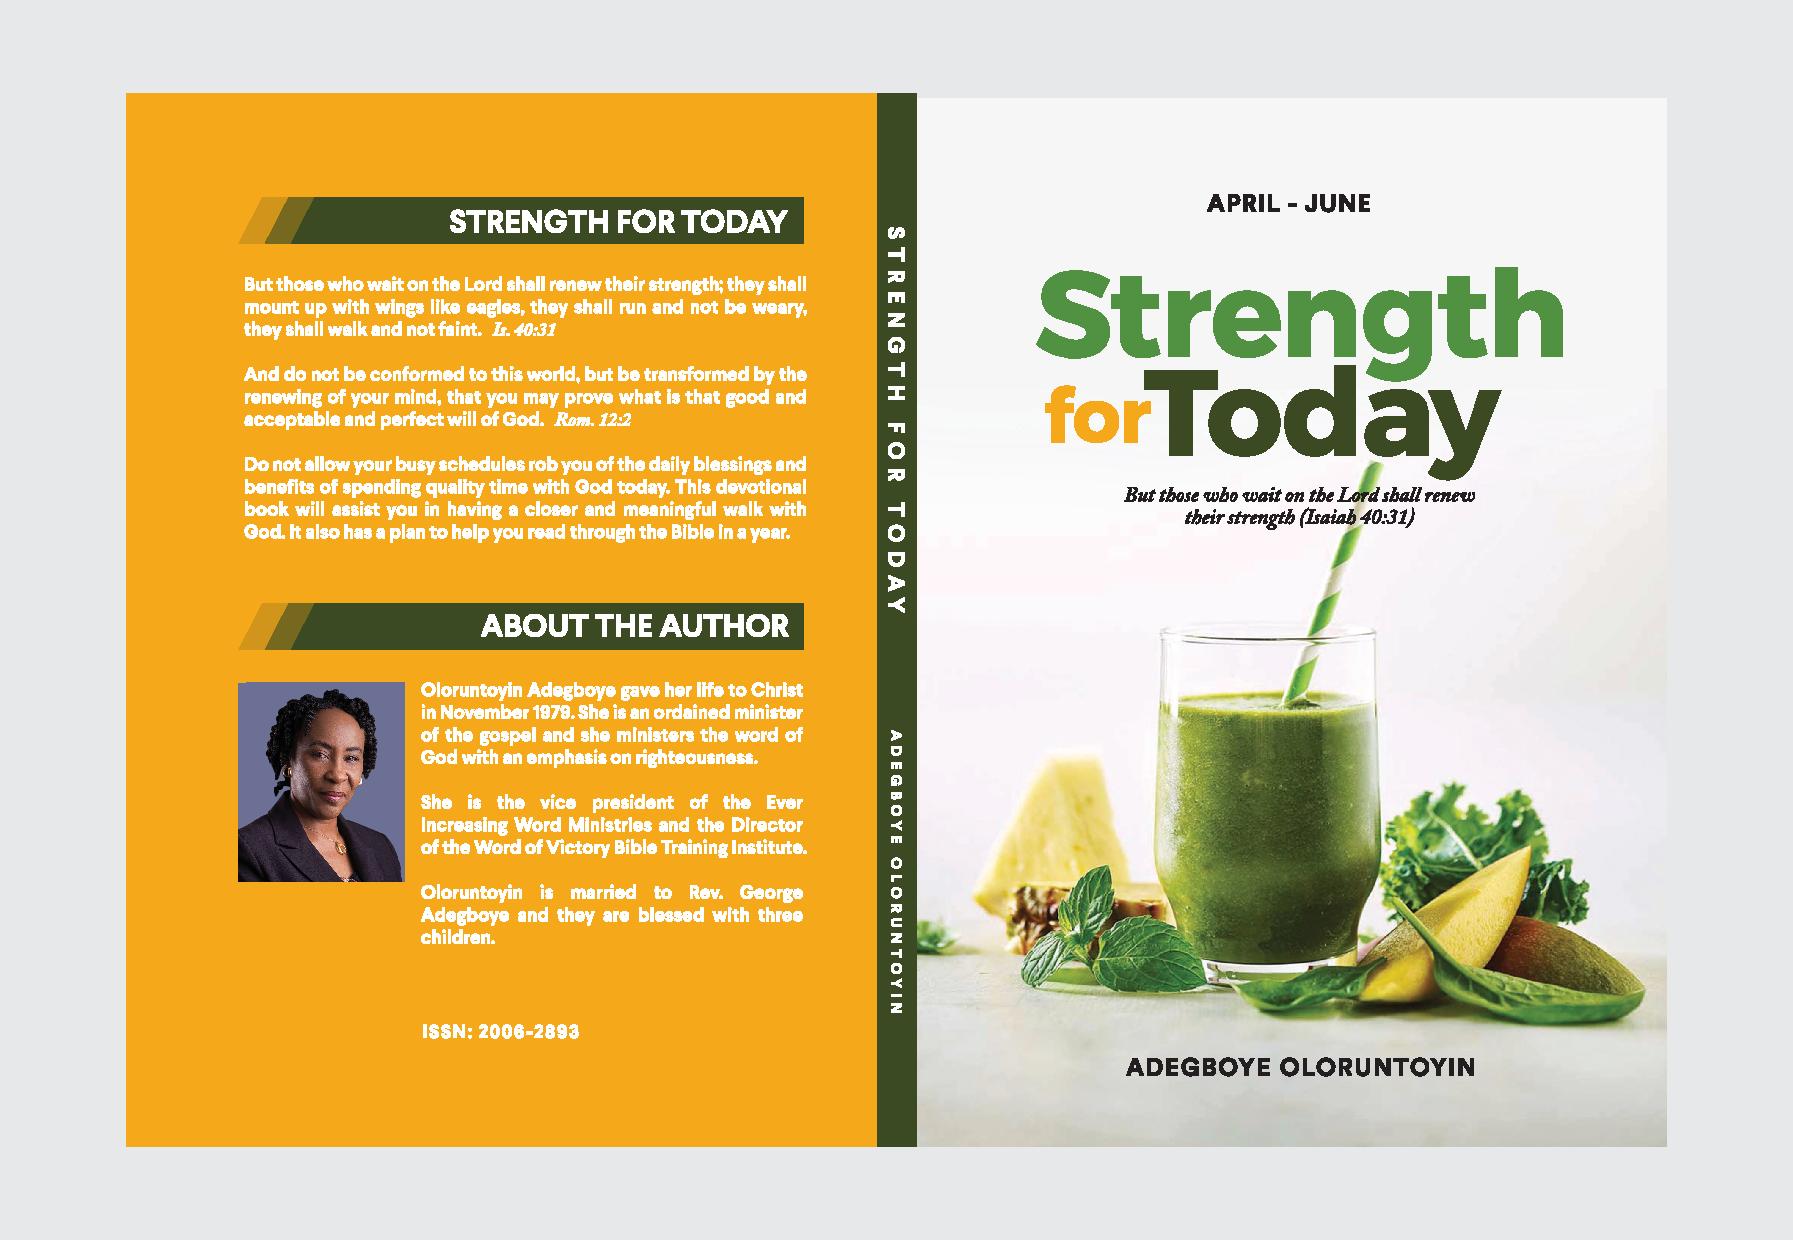 Strength for Today [Book]